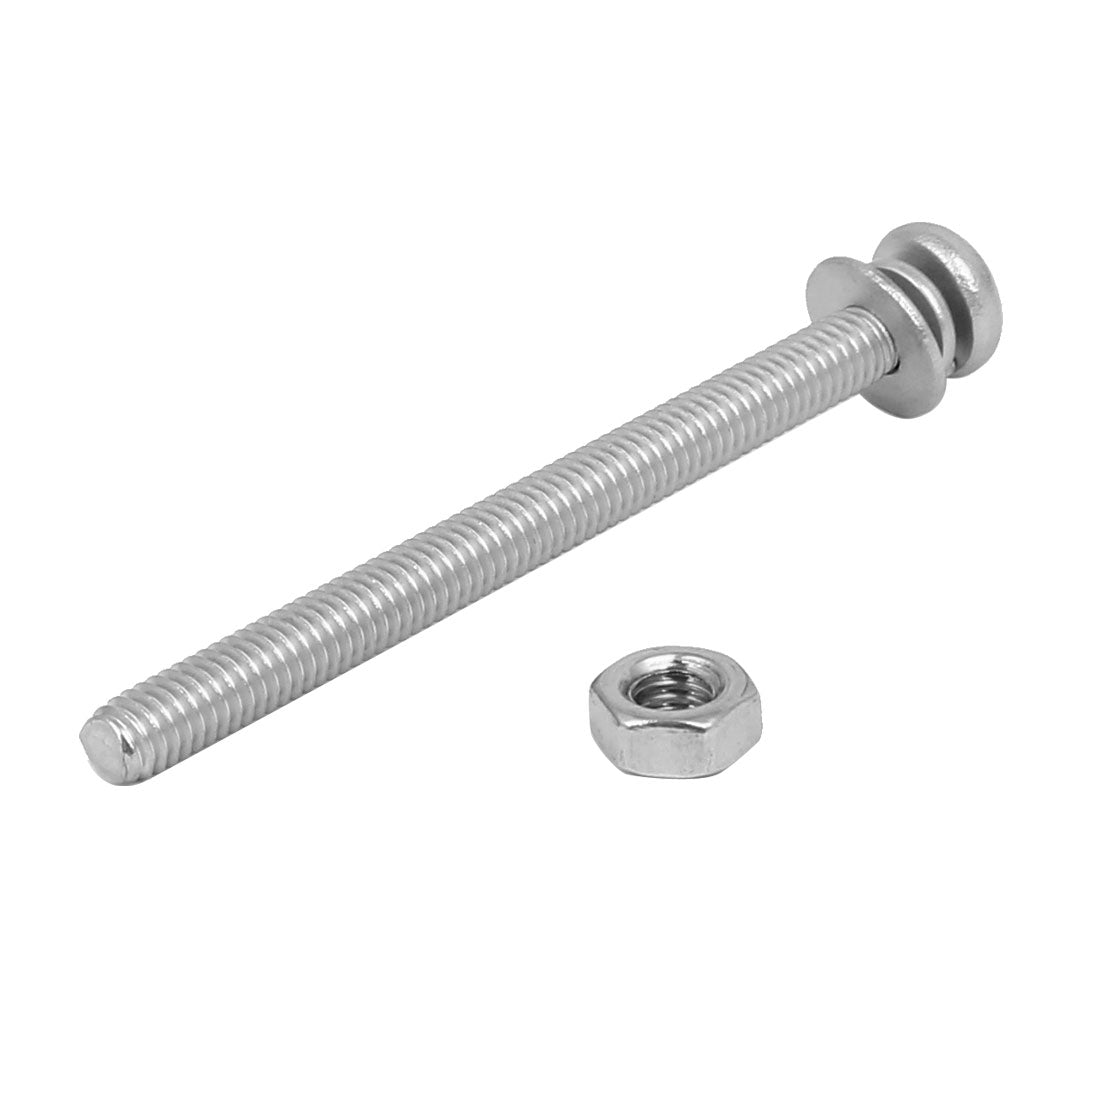 uxcell Uxcell M4 x 55mm 304 Stainless Steel Phillips Pan Head Screws Nuts w Washers 10 Sets